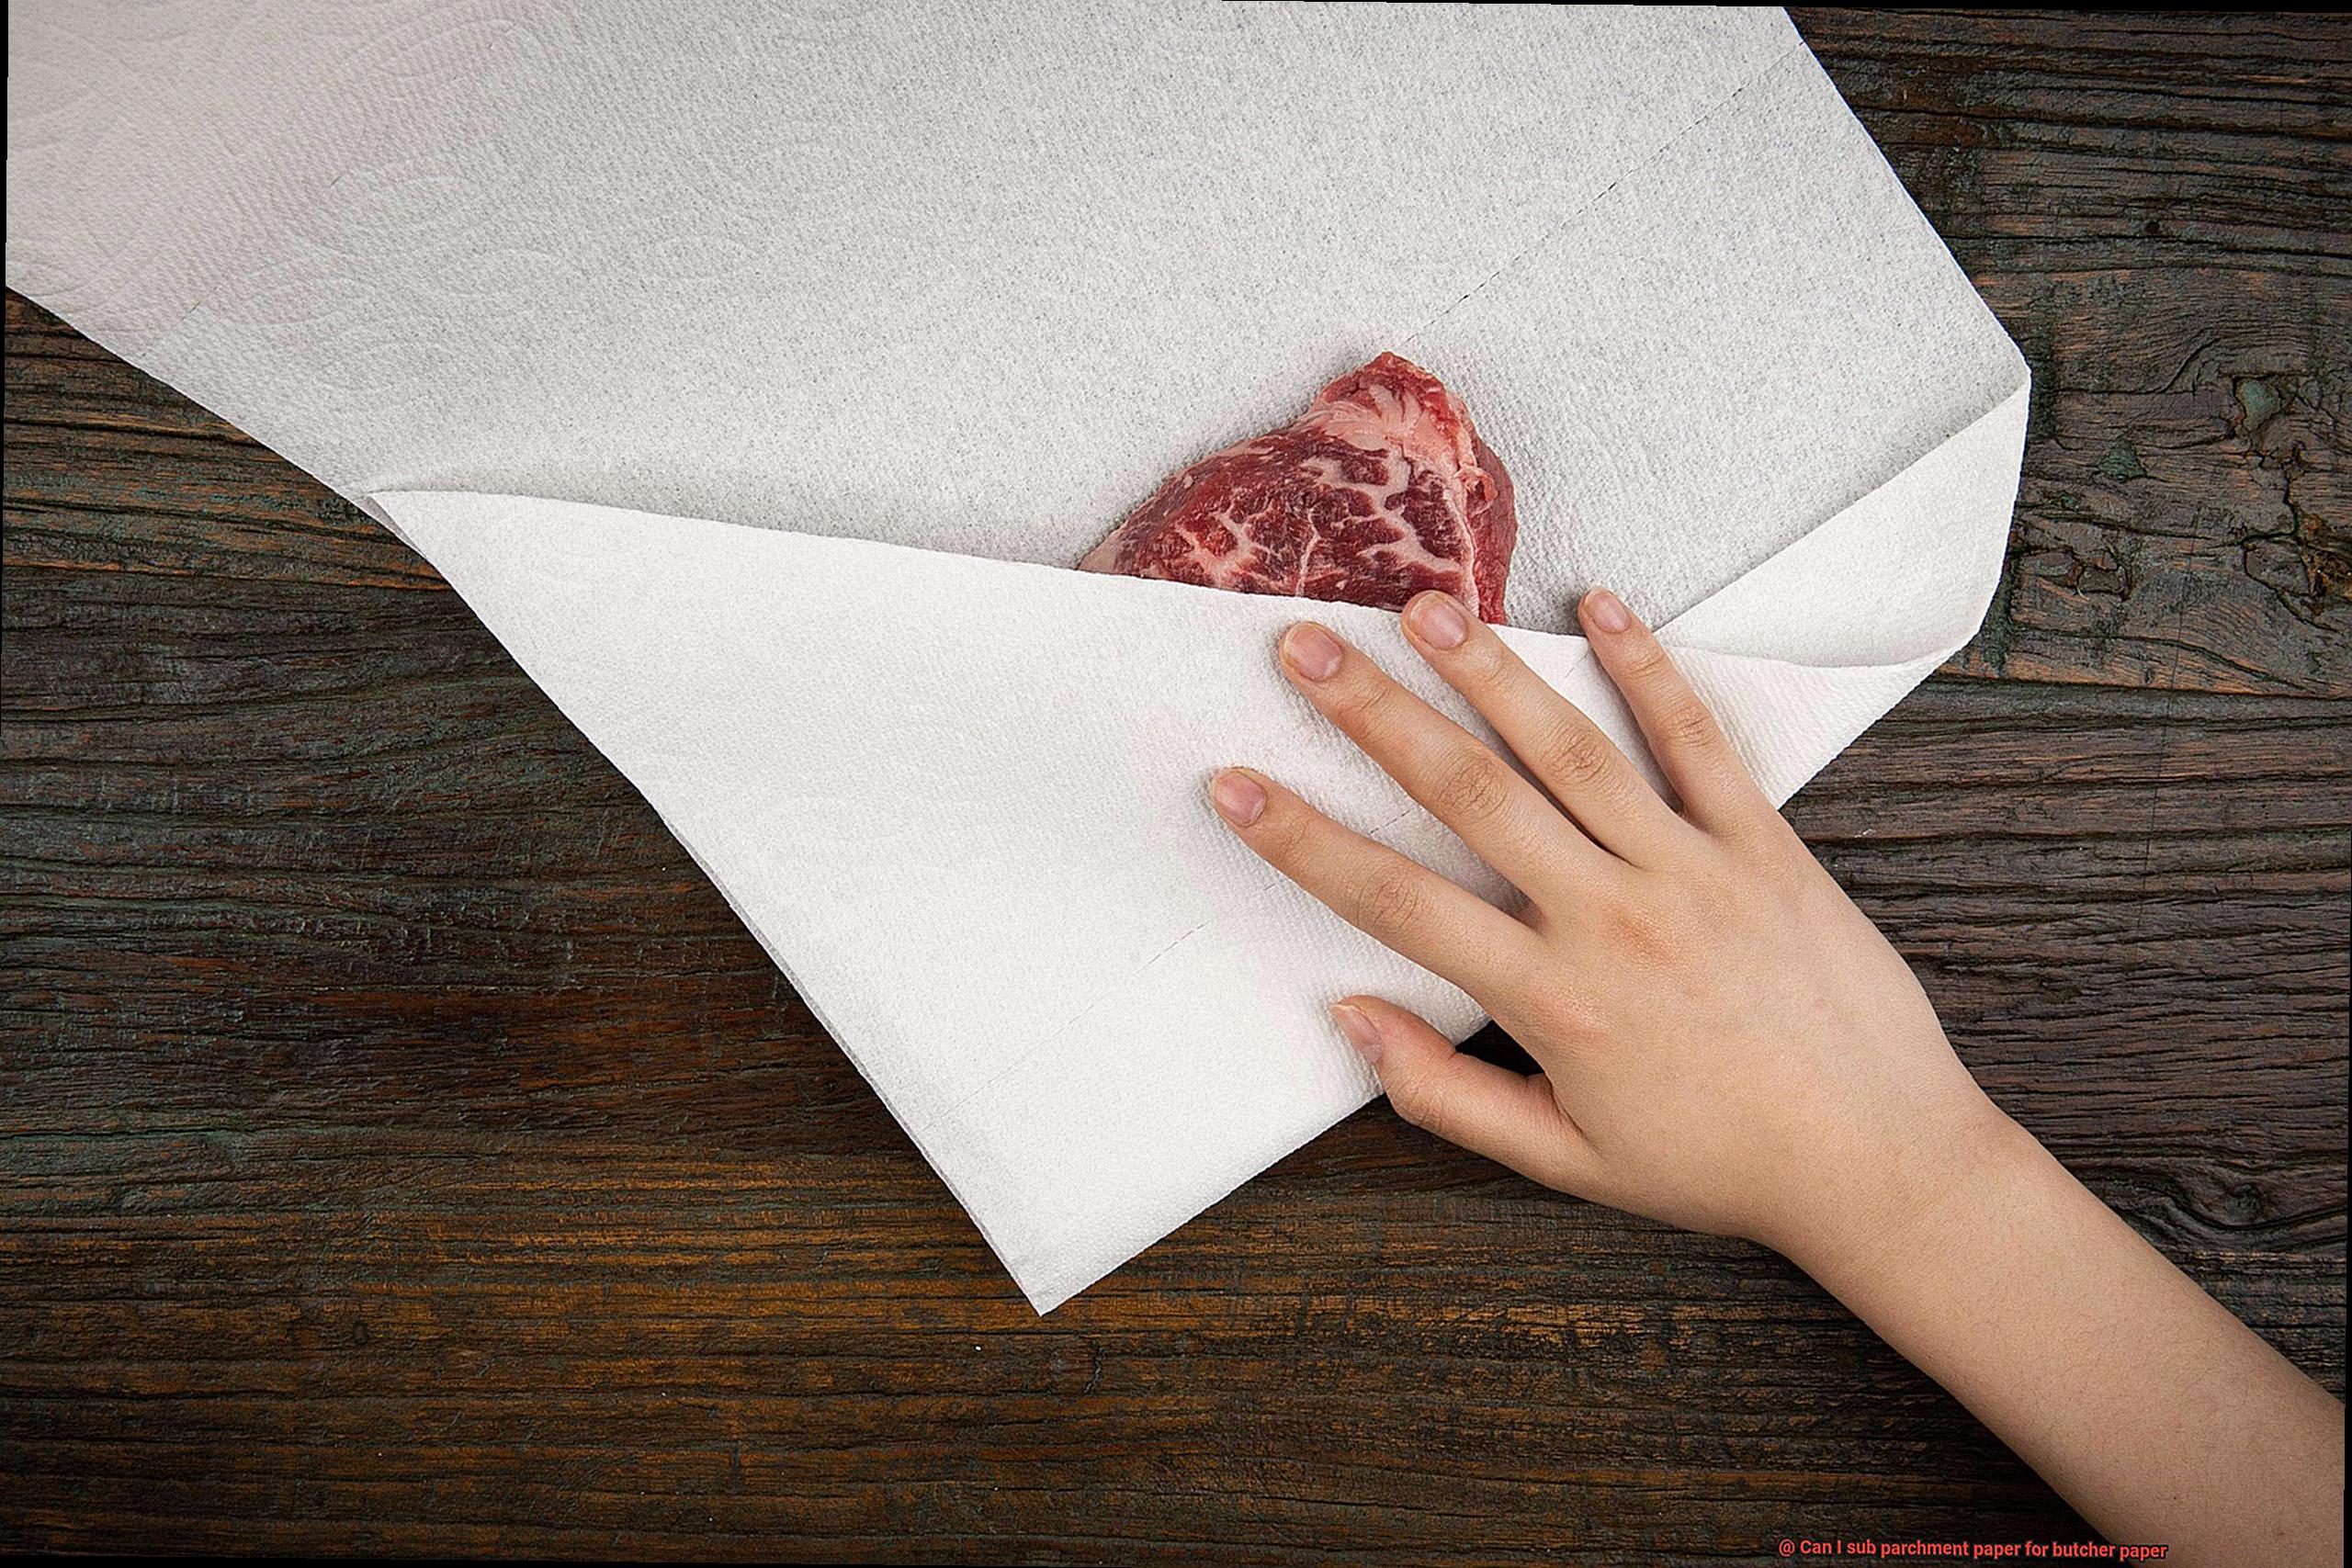 Can I sub parchment paper for butcher paper-2